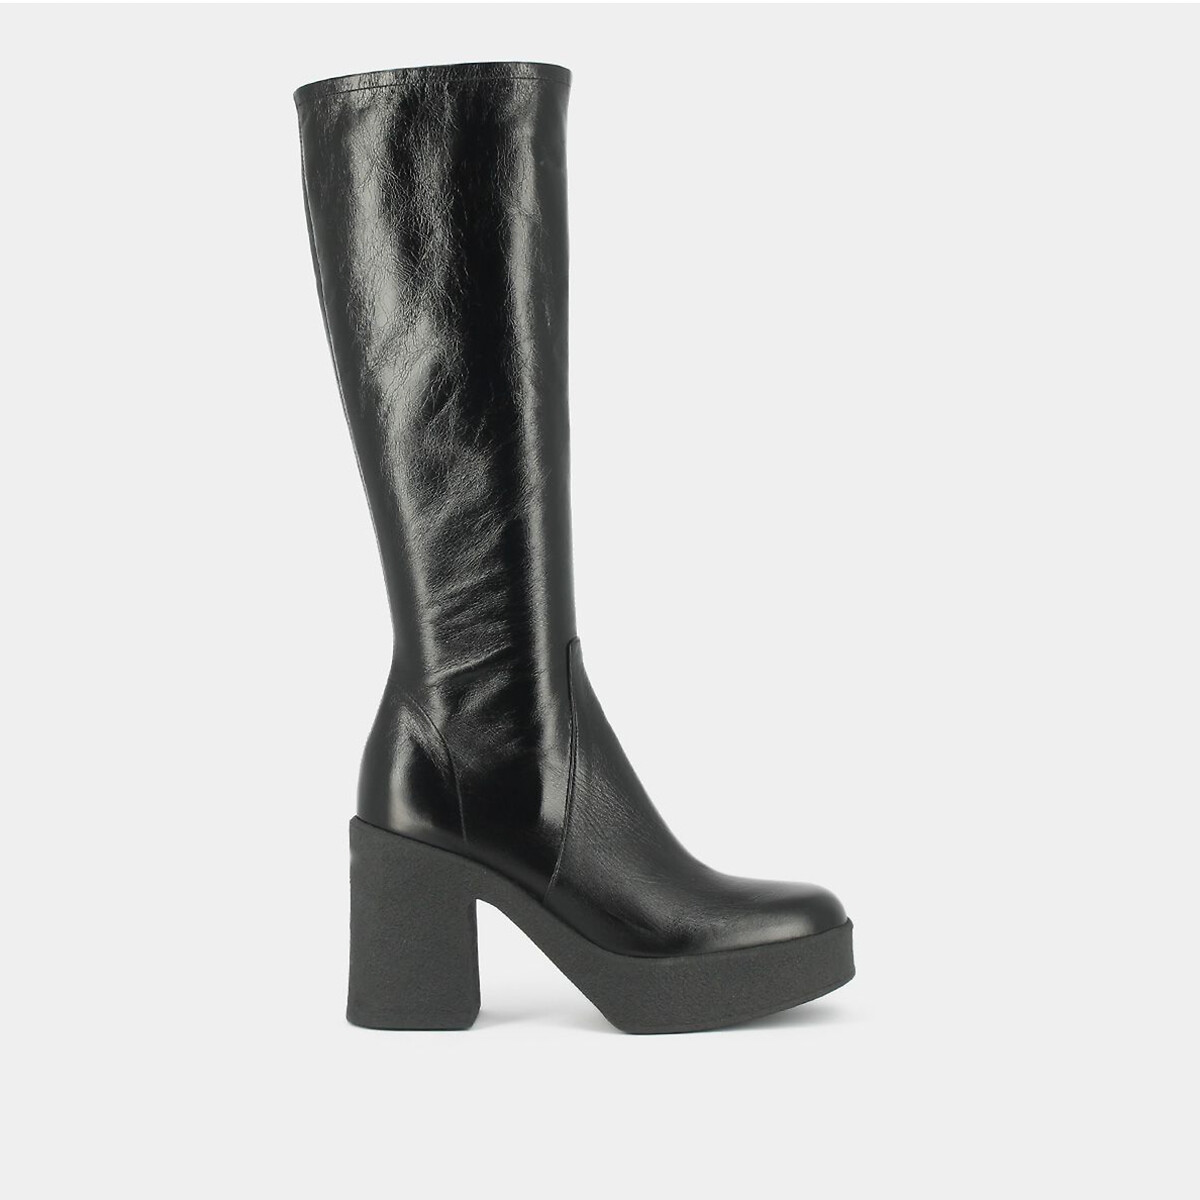 Dricia Platform Calf Boots in Distressed Leather